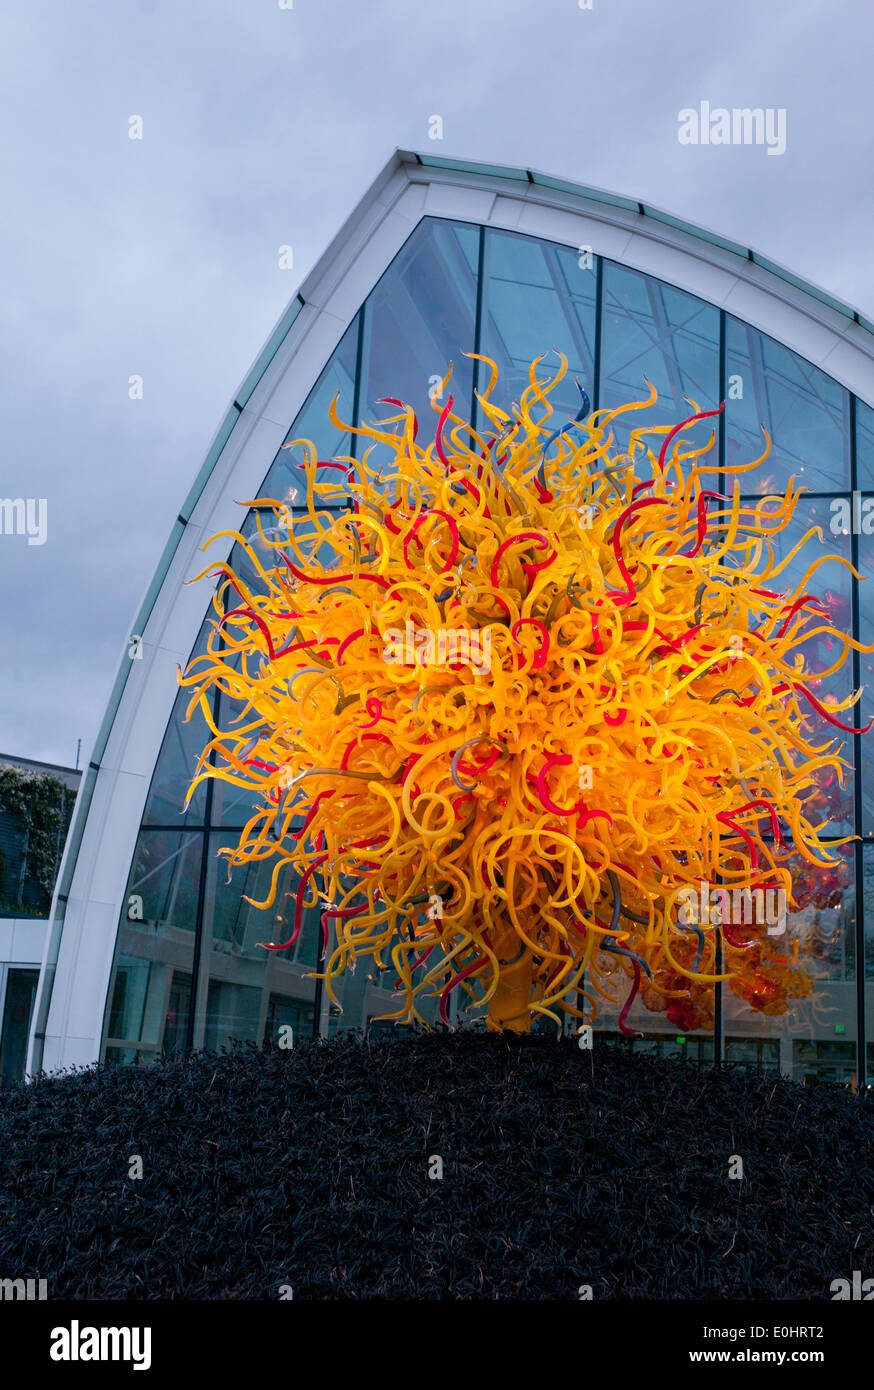 Glass Sculpture At The Chihuly Garden And Glass Museum Seattle